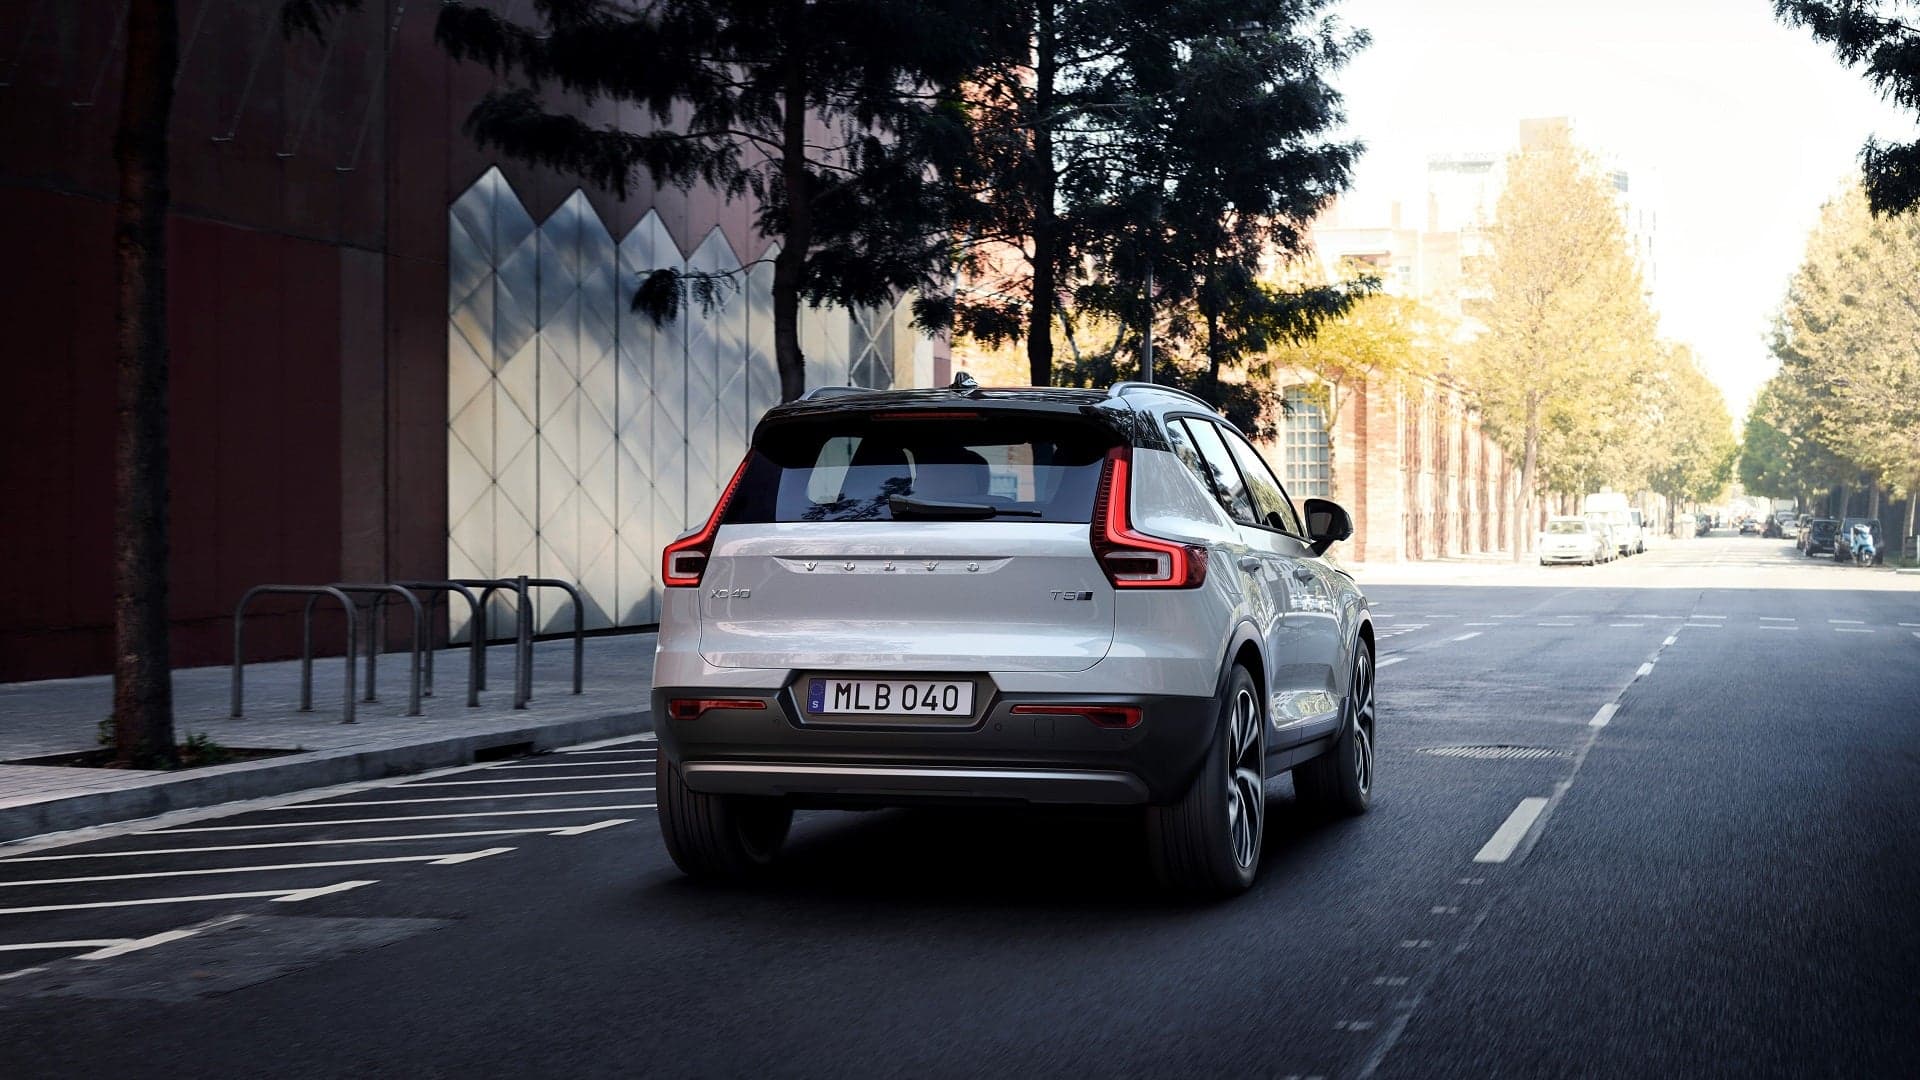 Volvo Announces the XC40, Its First Compact SUV